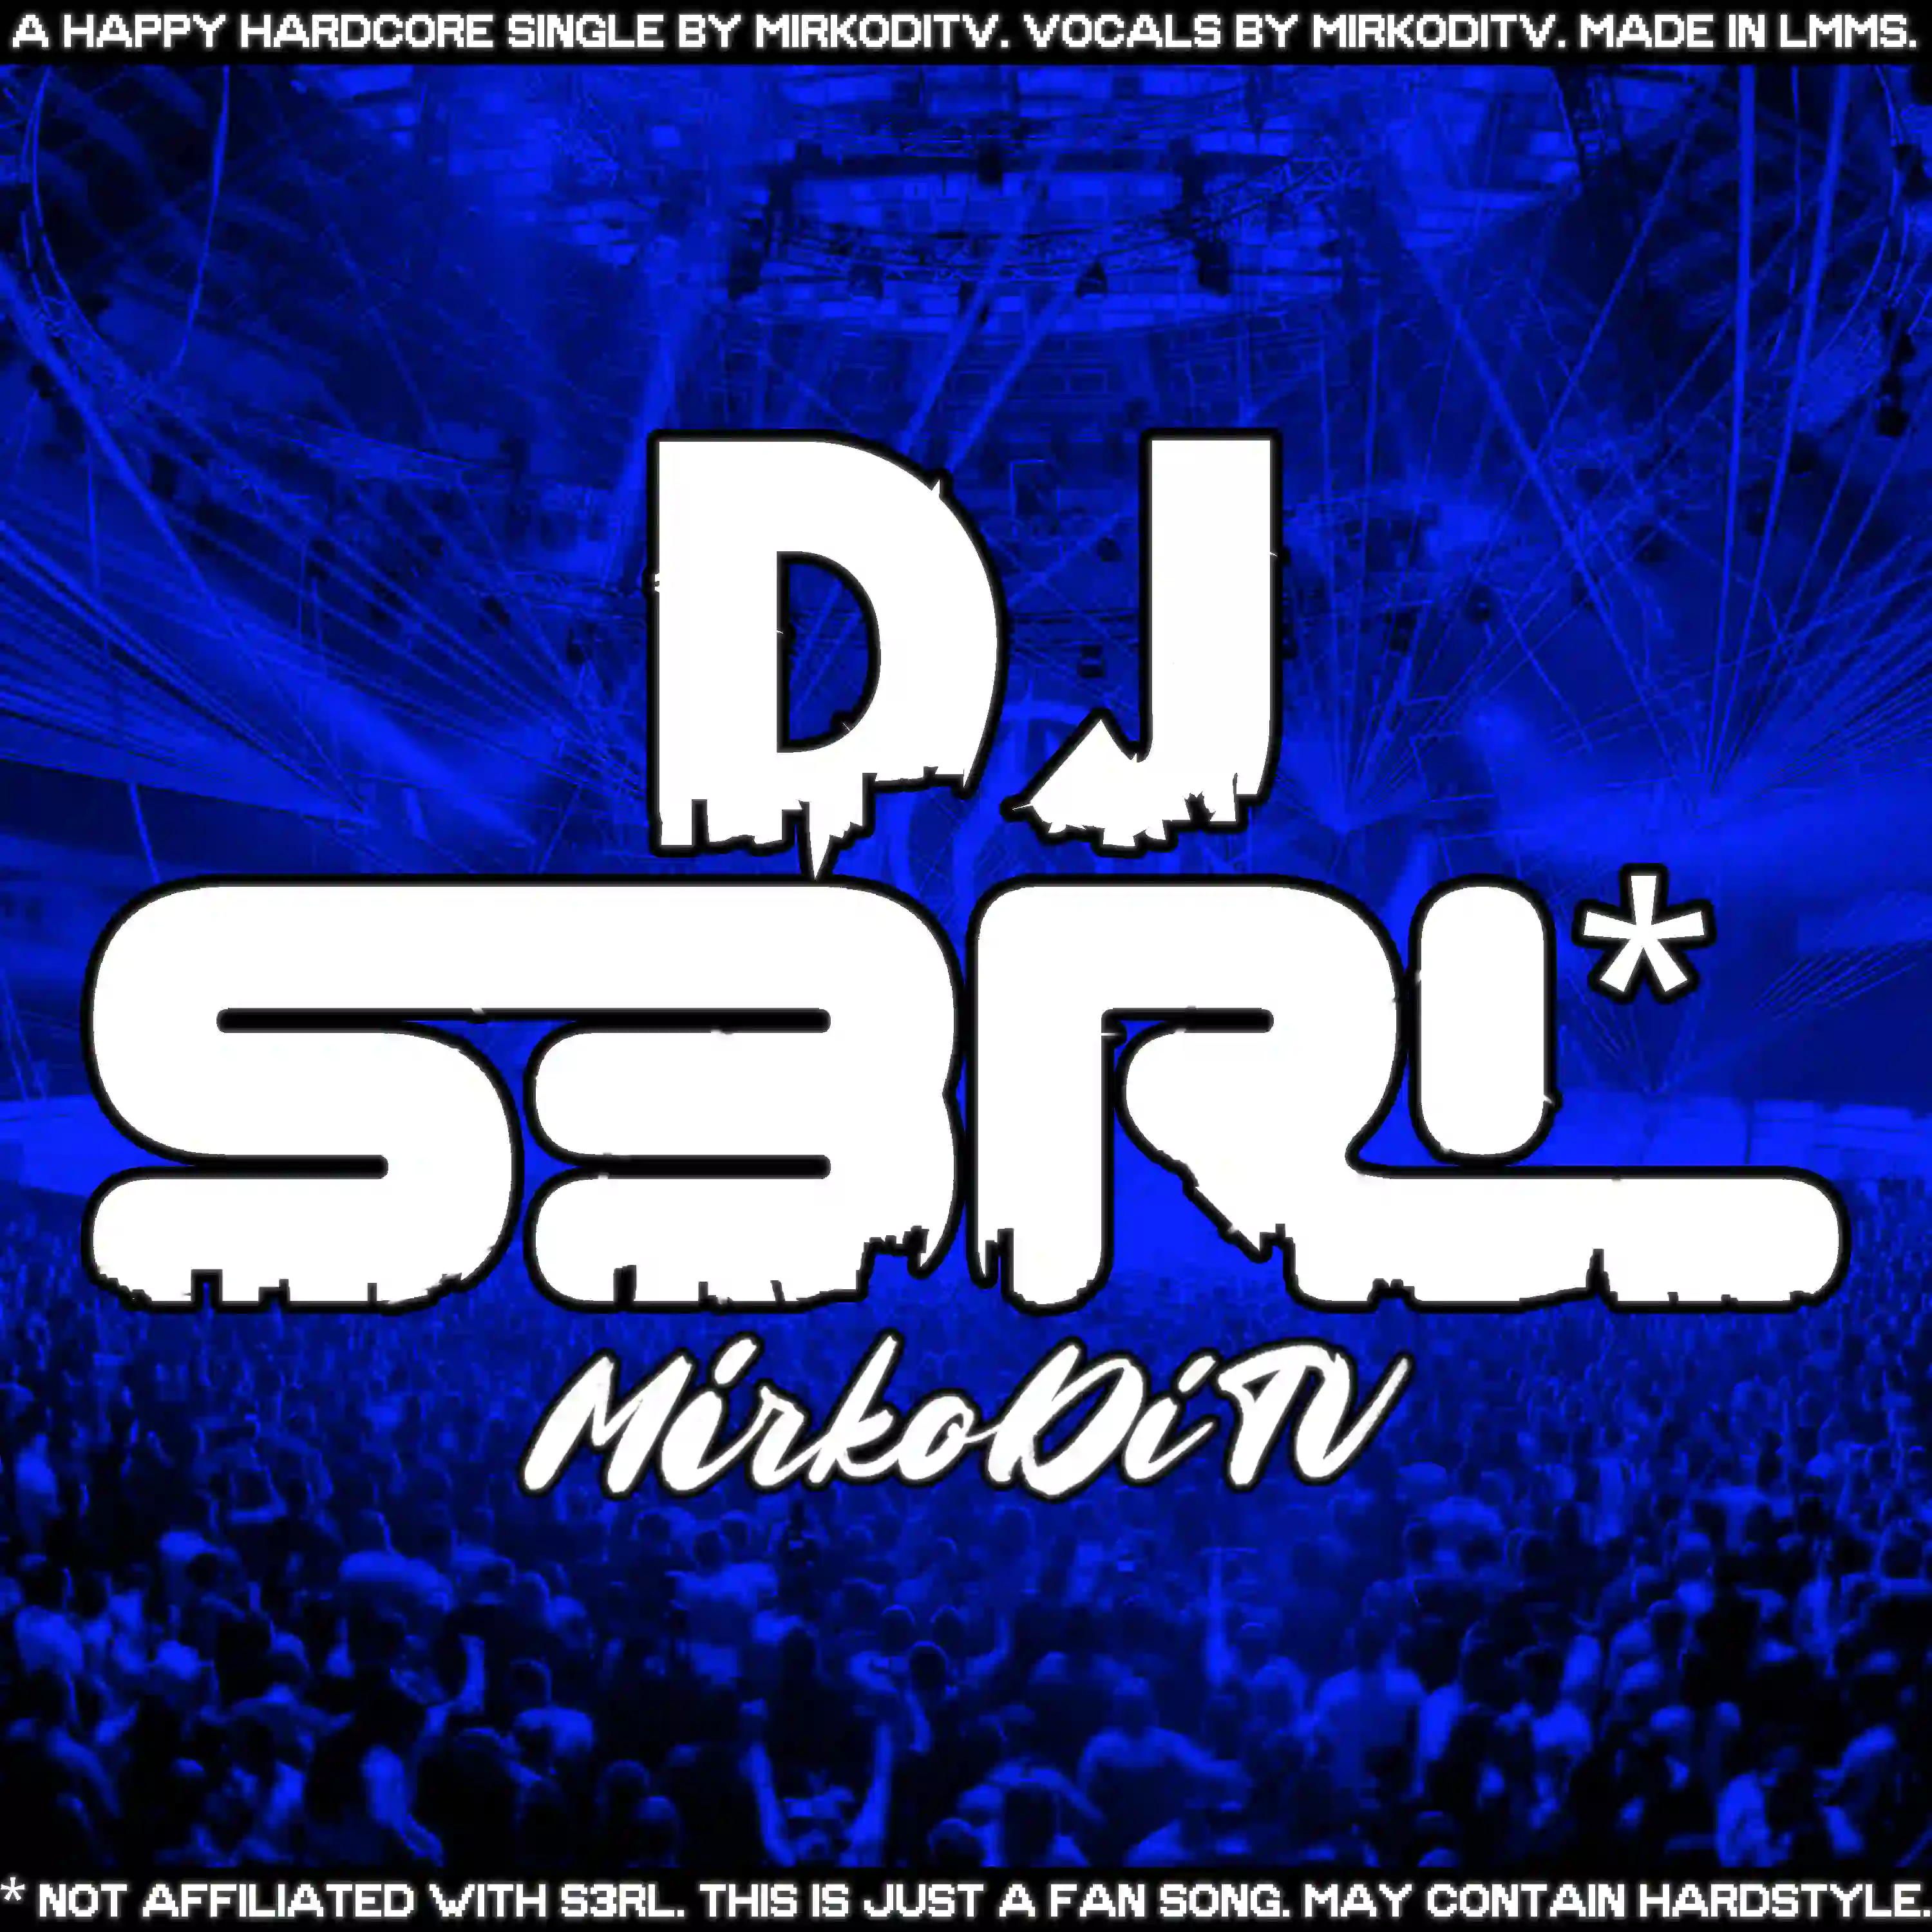 'DJ S3RL*', 'MirkoDiTV' white text/black border on a
                           blue-colourised rave background. At the top and
                           bottom, very narrow black bars, with white text on
                           the foreground: 'A happy hardcode single by
                           MirkoDiTV. Vocals by MirkoDiTV. Made in LMMS.' and
                           'Not affiliated with S3RL. This is just a fan song.
                           May contain hardstyle.'.